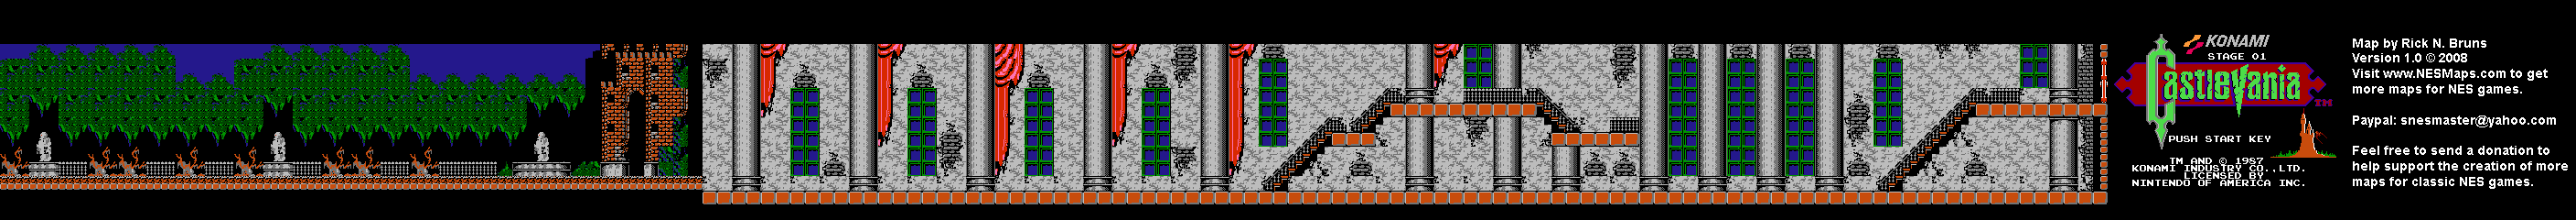 Castlevania - Stage 01 Nintendo NES Background Only Map